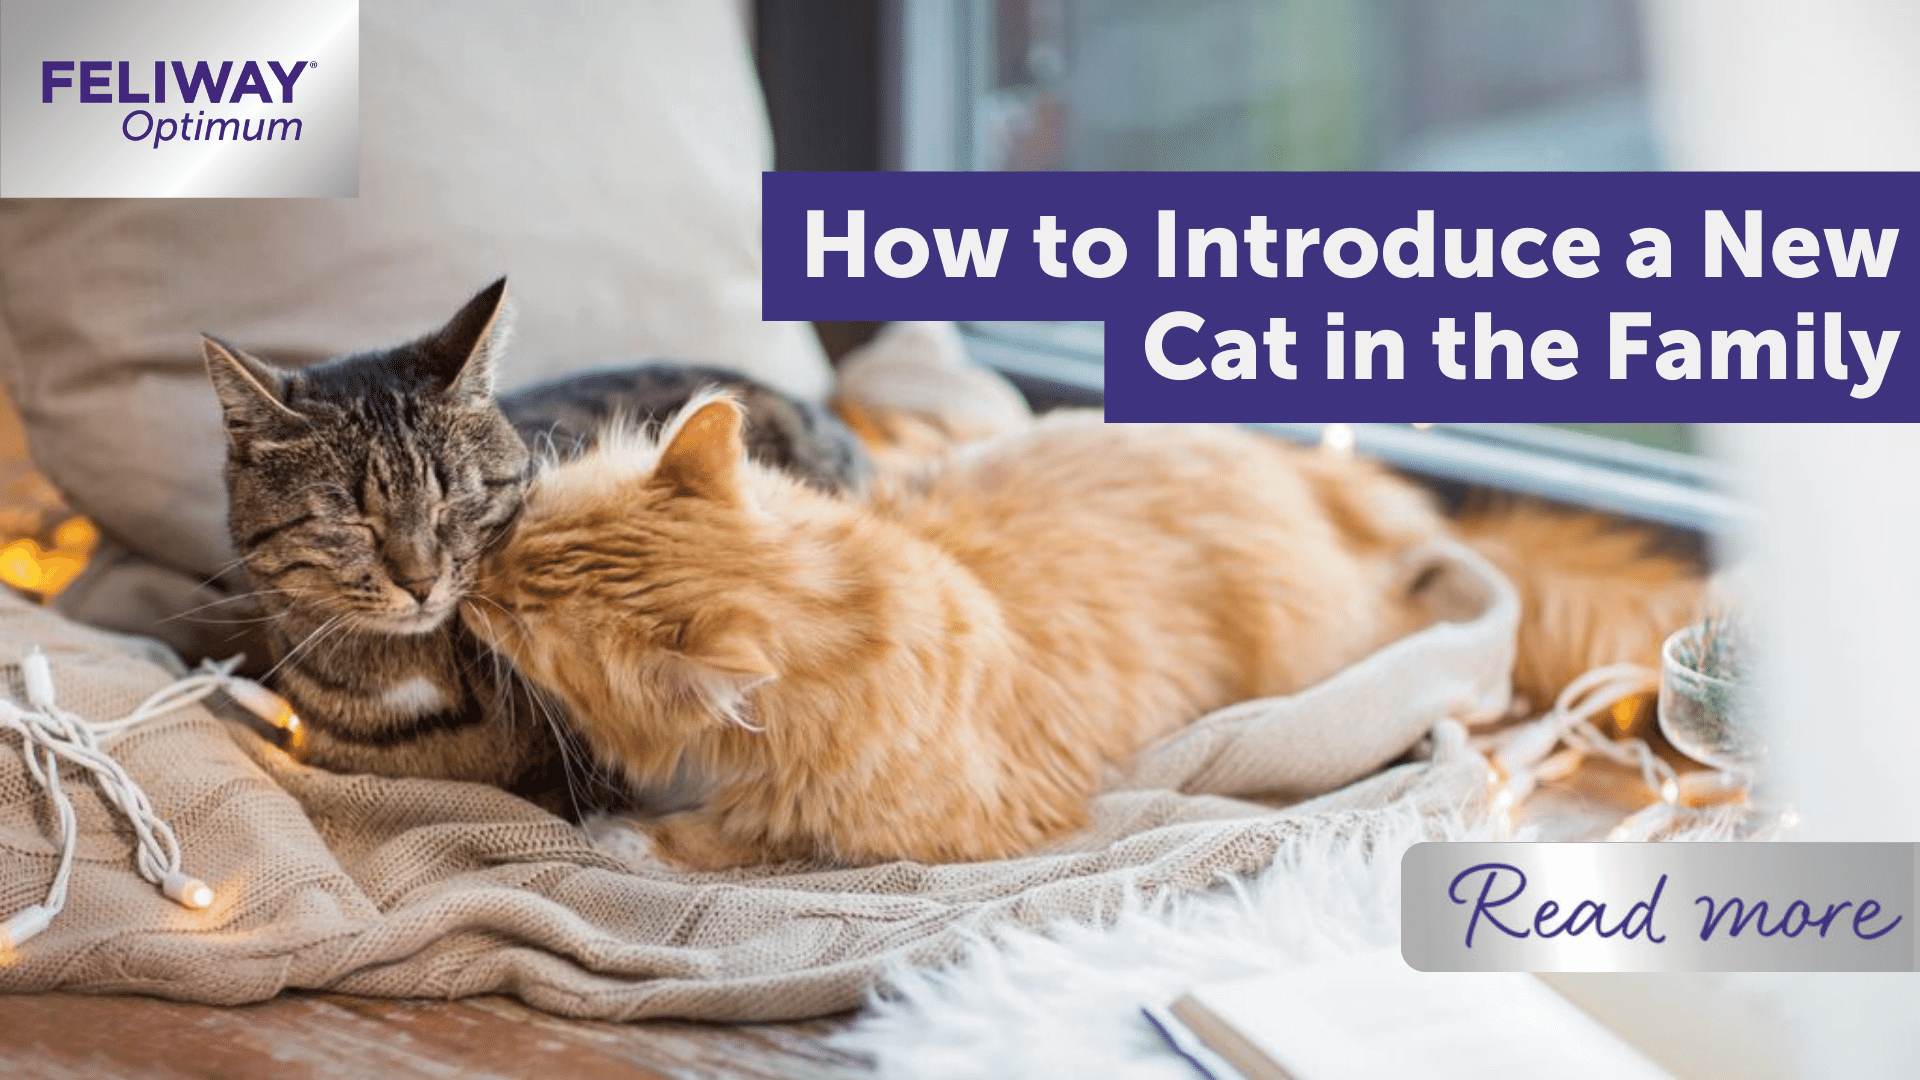 How to Introduce a New Cat in the Family